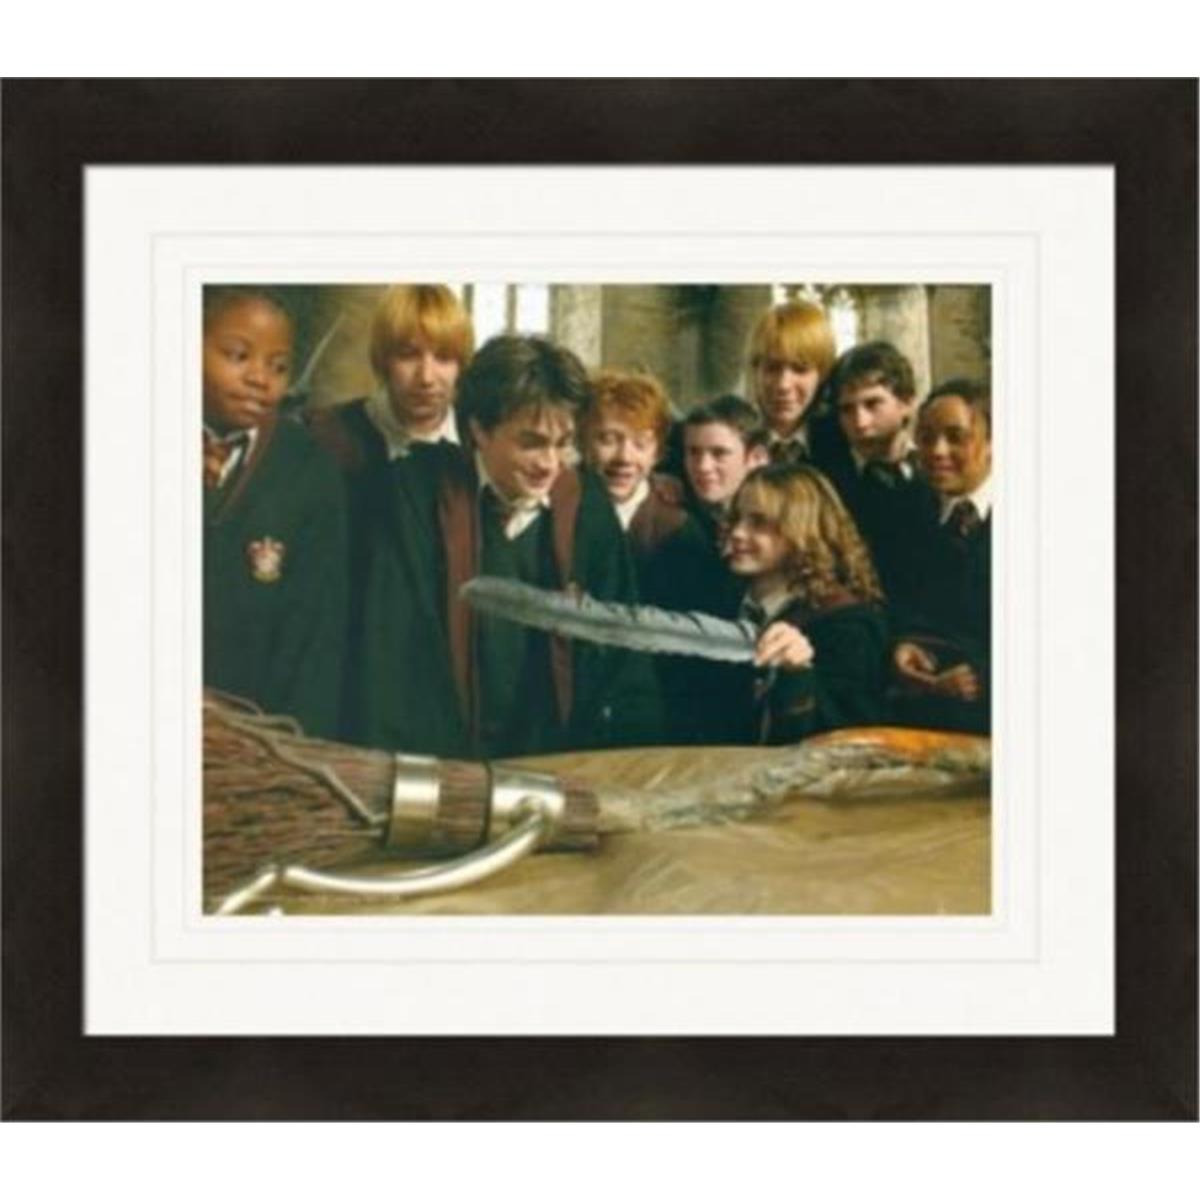 443763 8 x 10 in. Harry Potter Daniel Radcliffe Emma Watson No.13 Matted & Framed Photo -  Autograph Warehouse